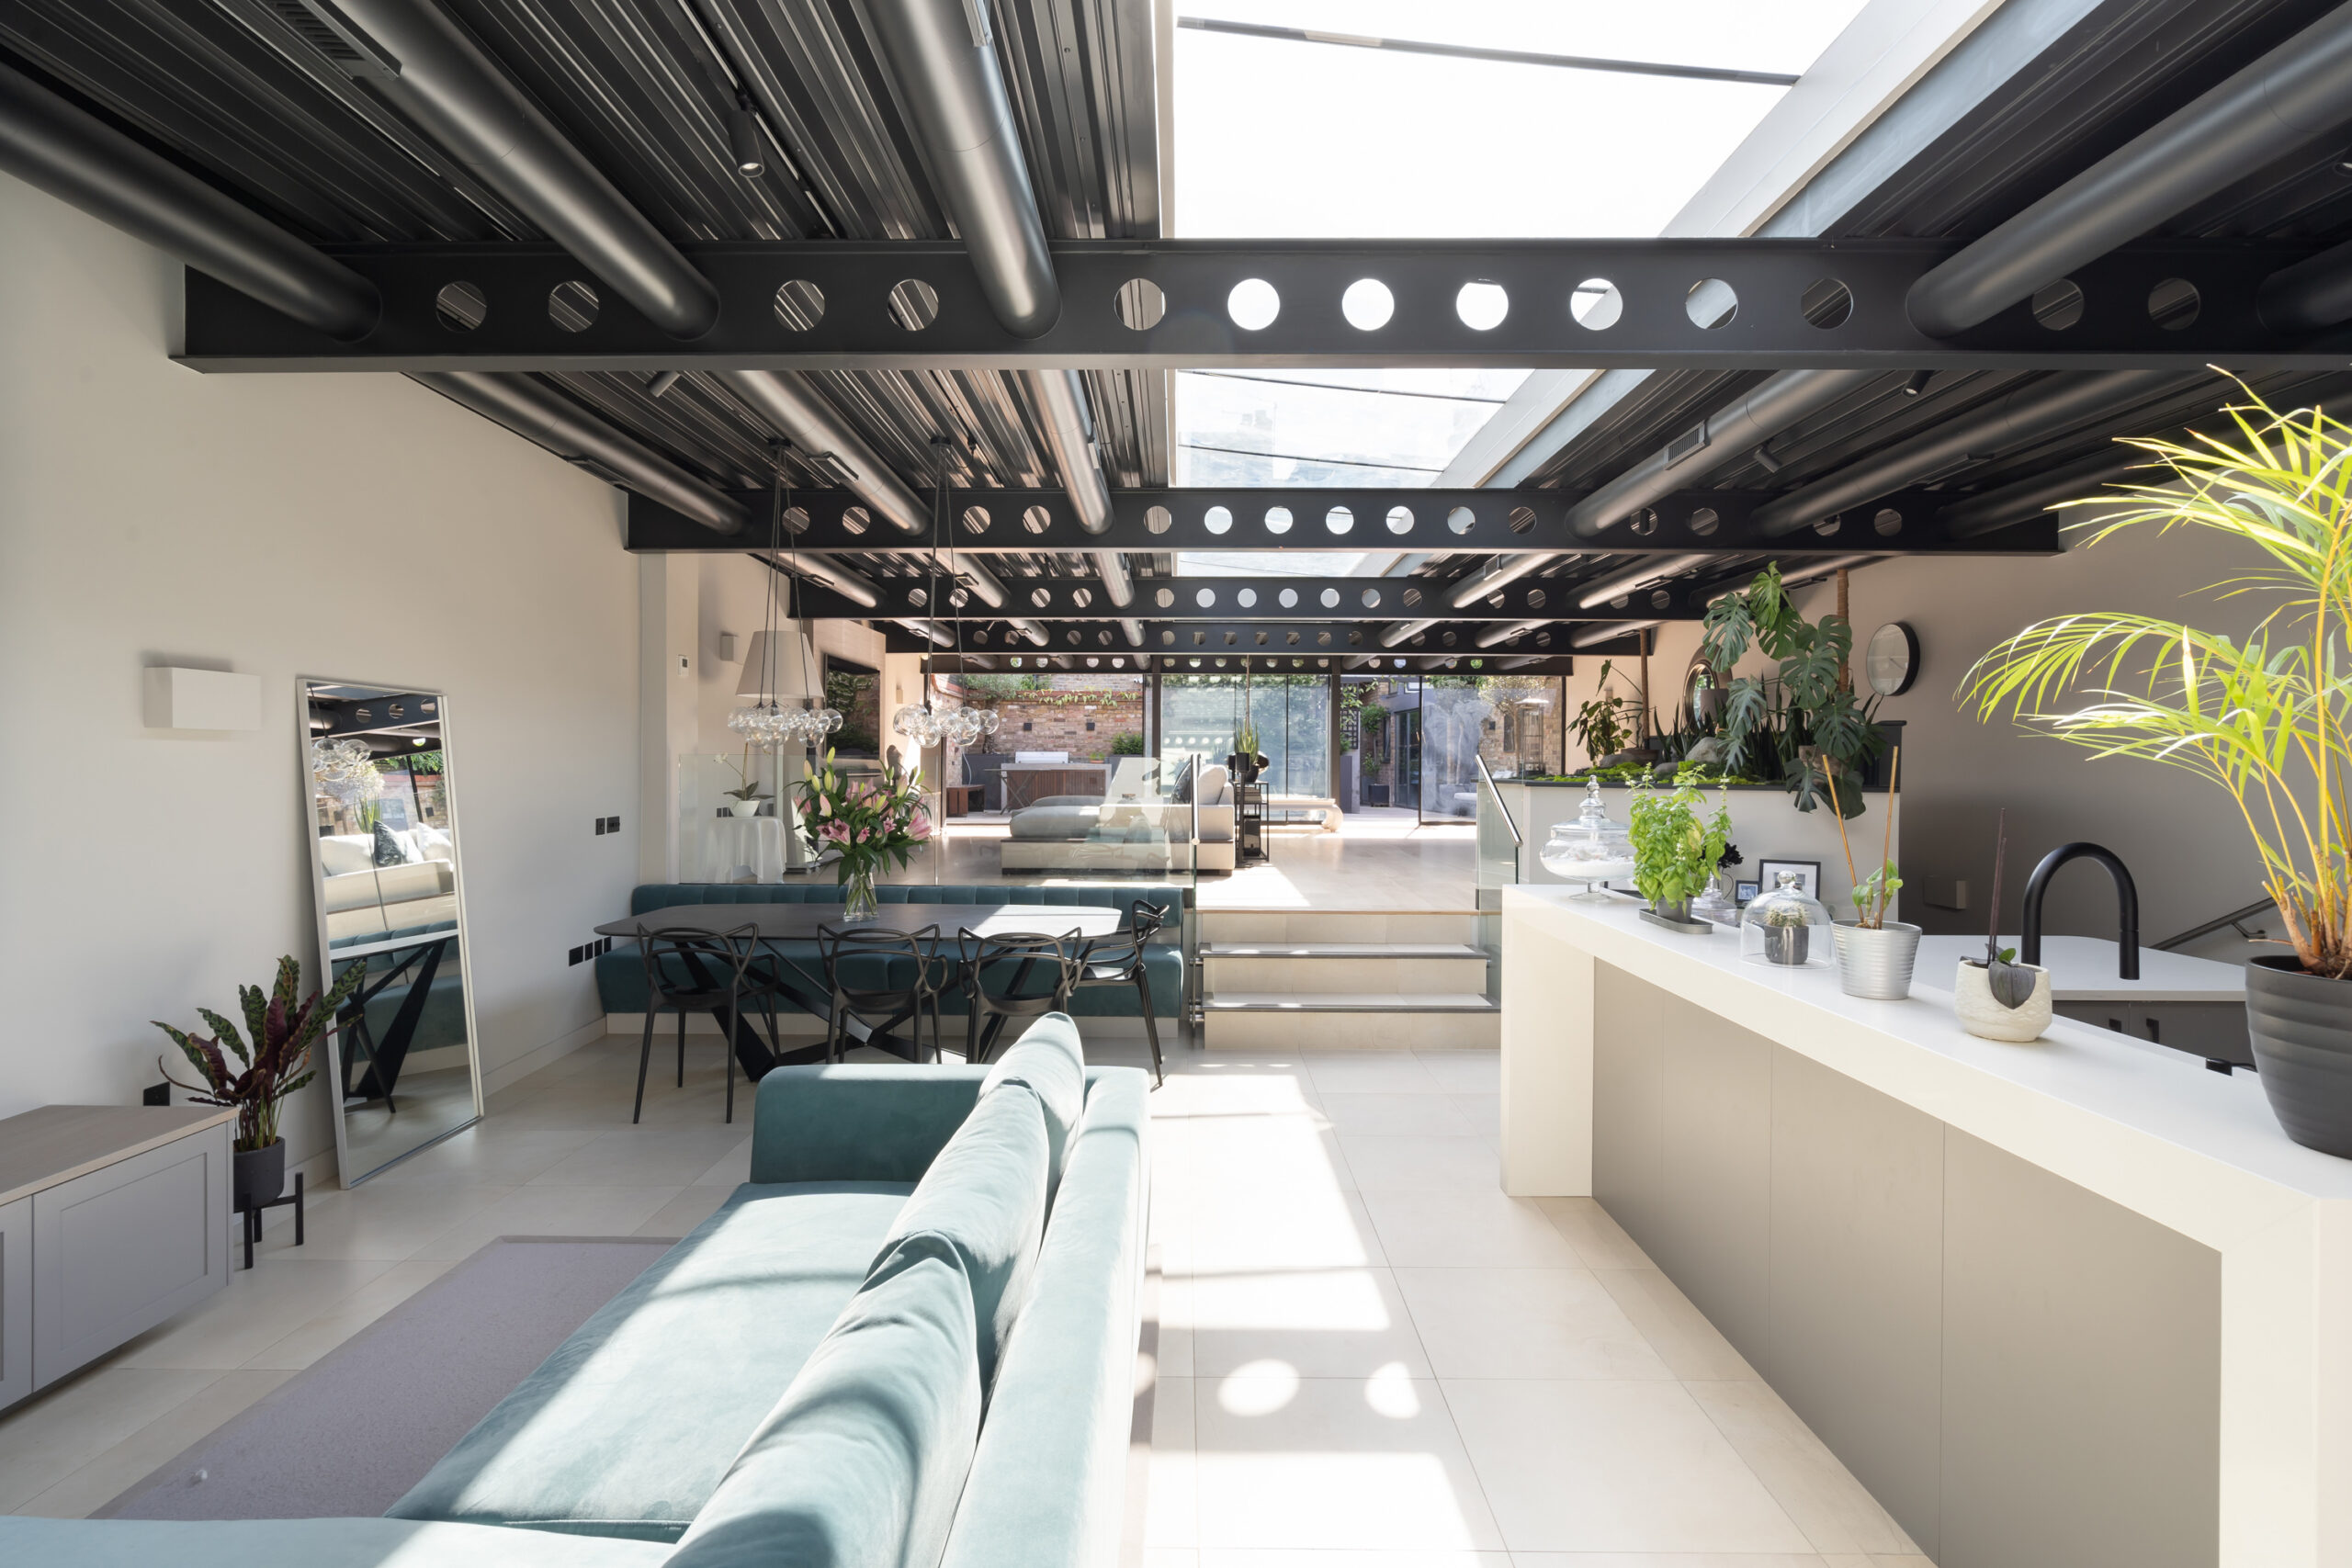 For Sale: Tilton Street Fulham SW6 industrial style reception room with steel ceiling and contemporary interiors